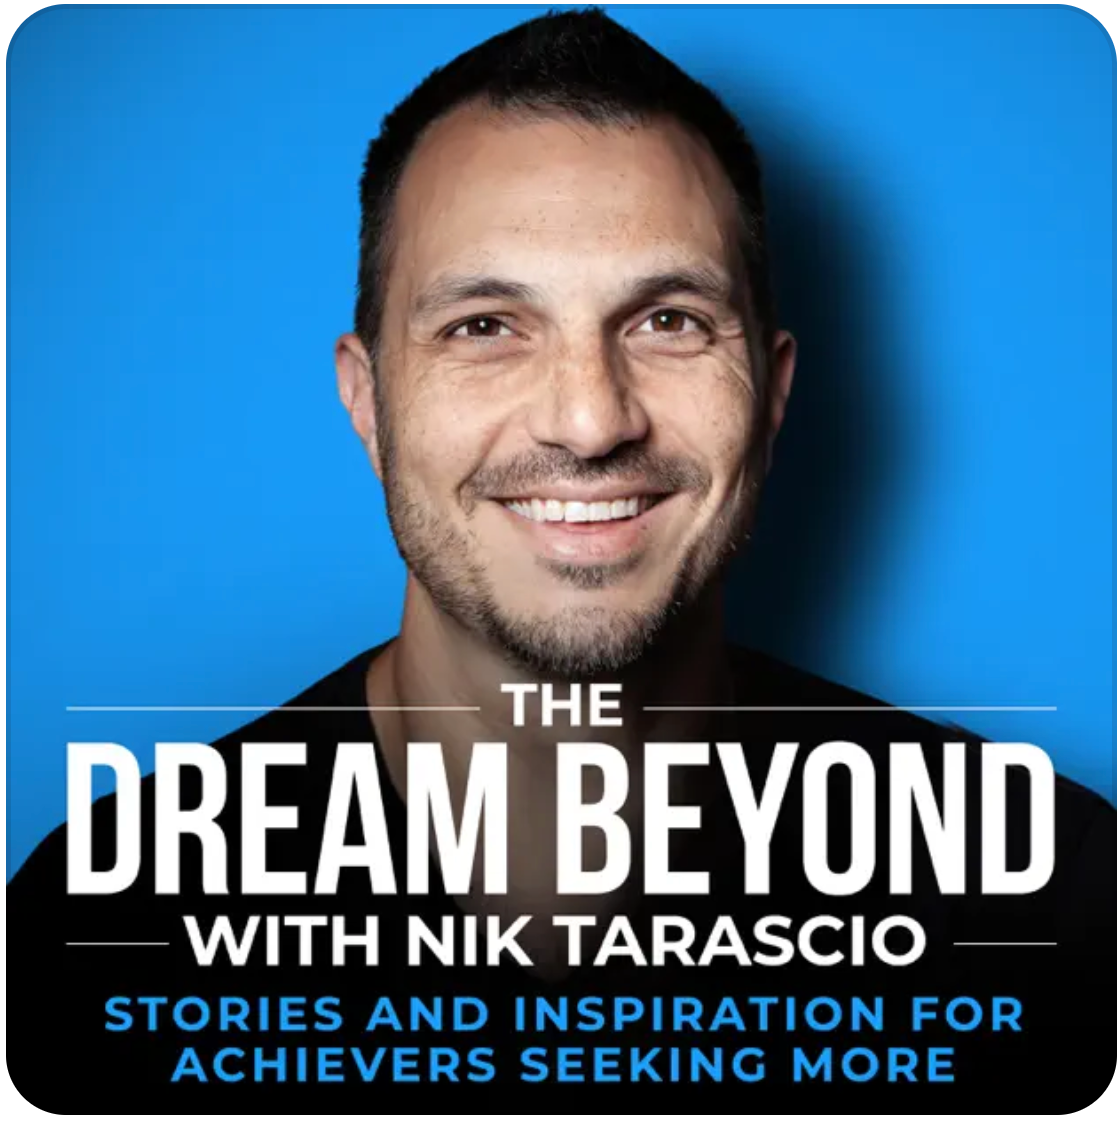 The Dream Beyond with Nik Tarascio - Redefining Wealth: An Experientially Rich Life with Joe Huff